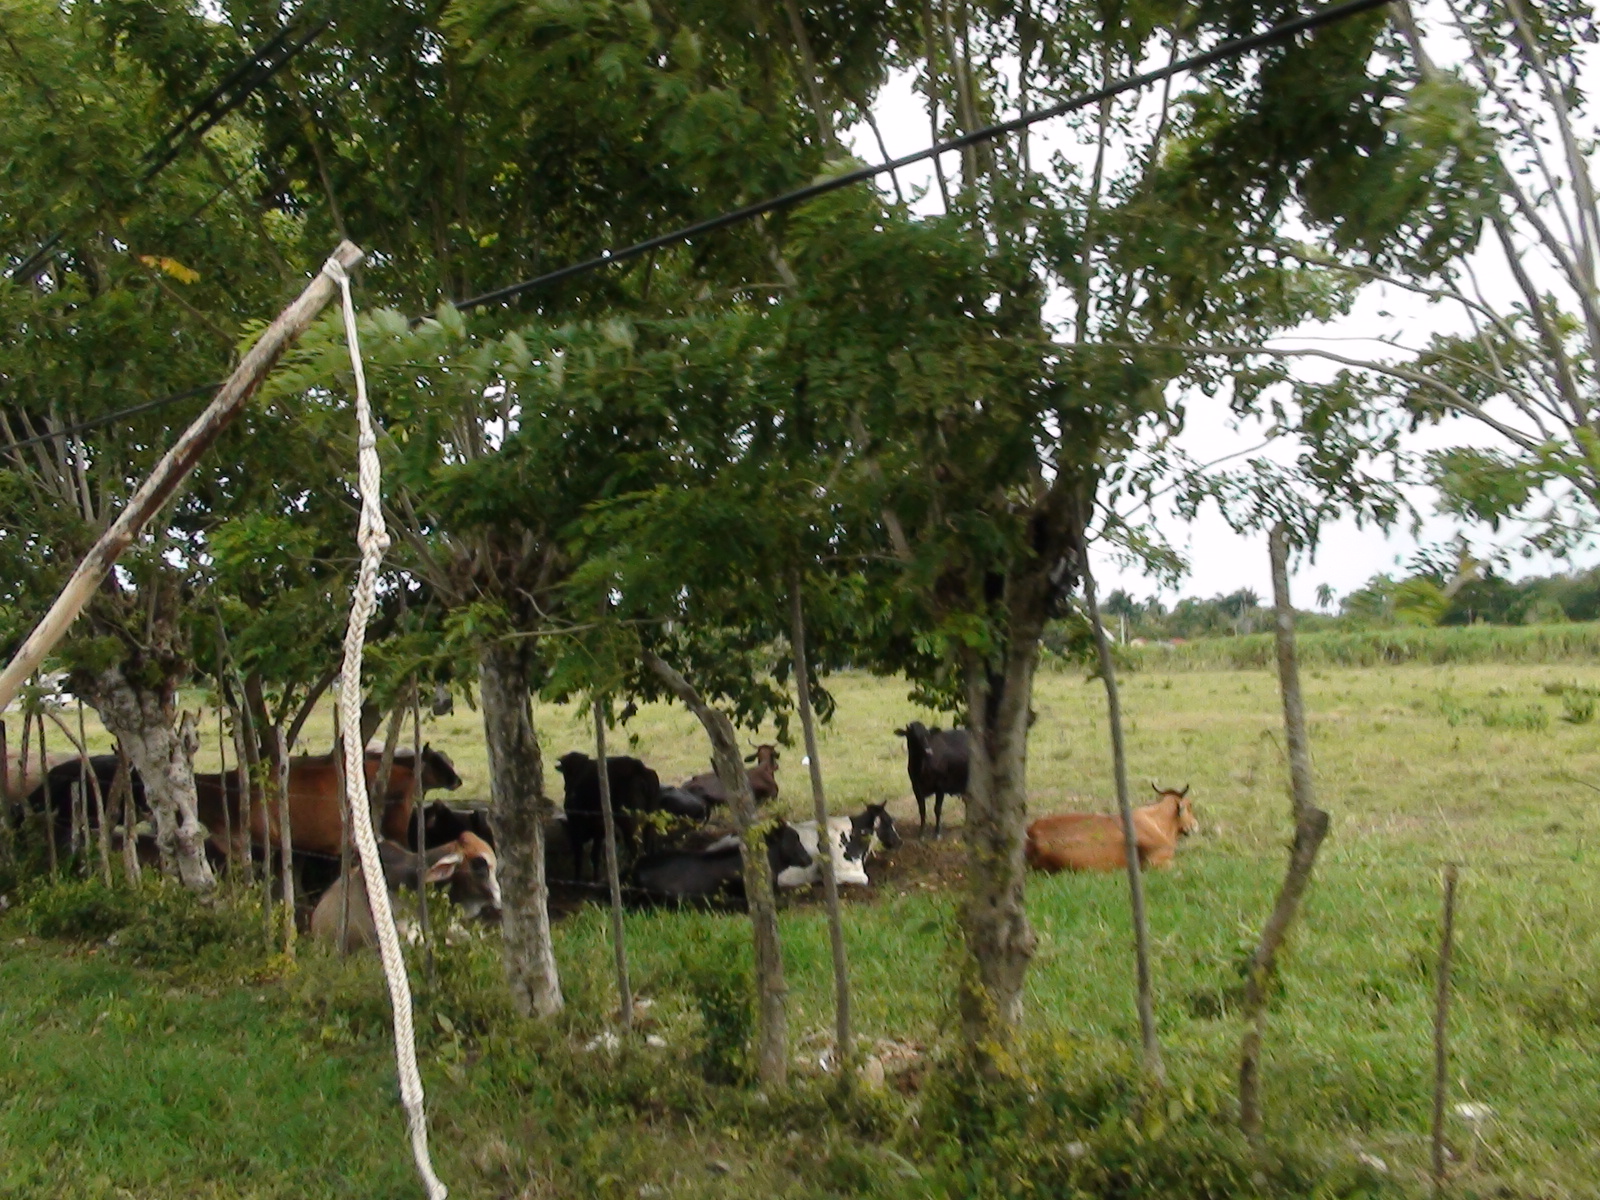 cattle are gathered under trees in the middle of a field